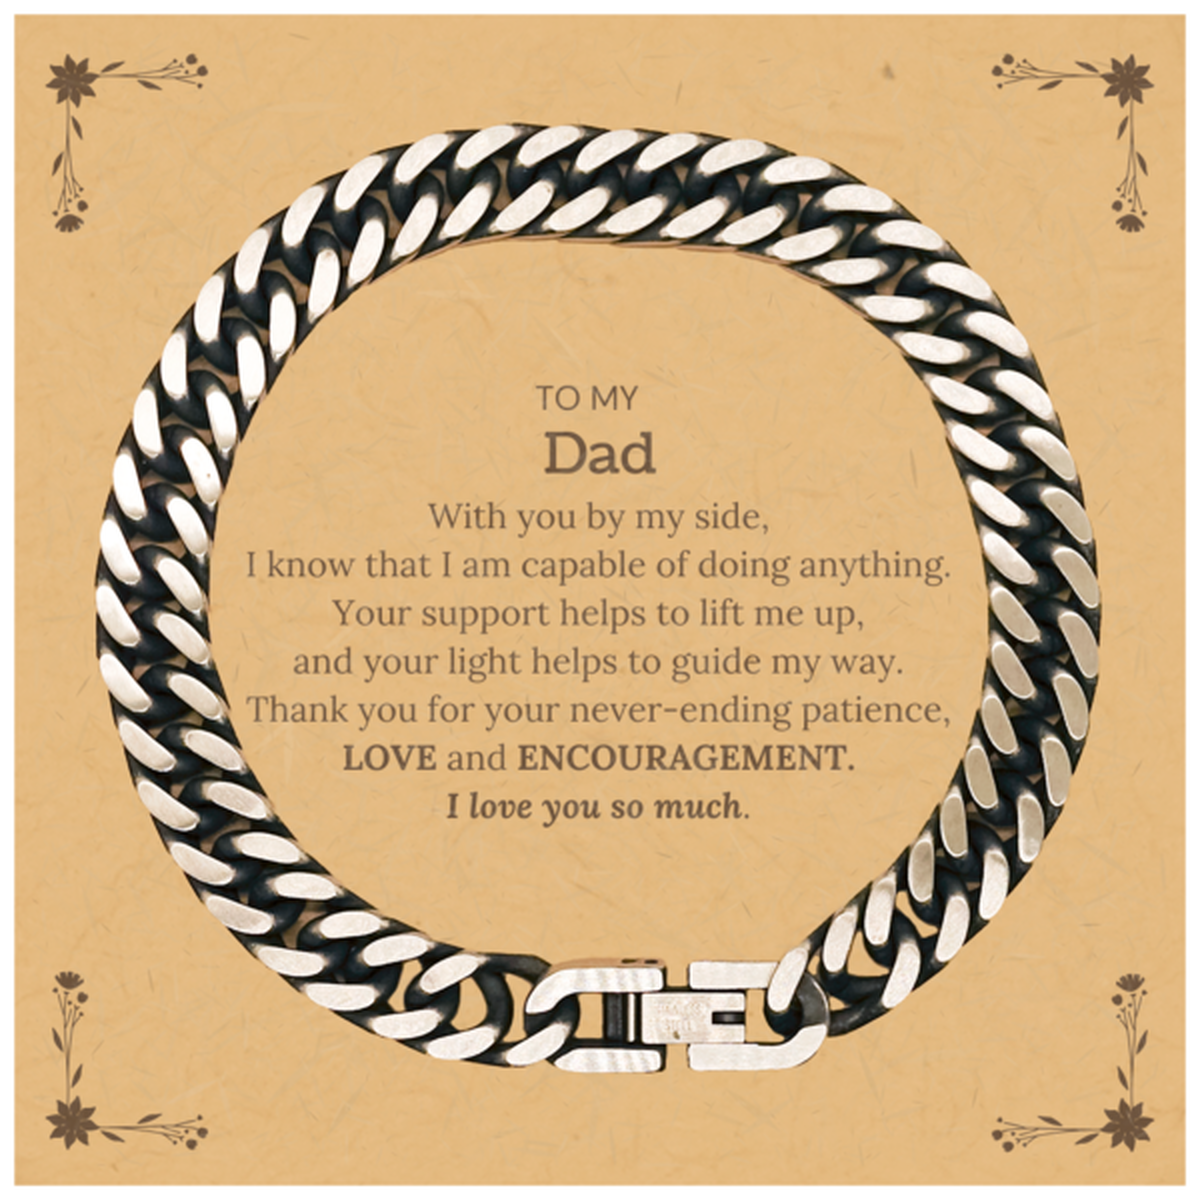 Appreciation Dad Cuban Link Chain Bracelet Gifts, To My Dad Birthday Christmas Wedding Keepsake Gifts for Dad With you by my side, I know that I am capable of doing anything. I love you so much